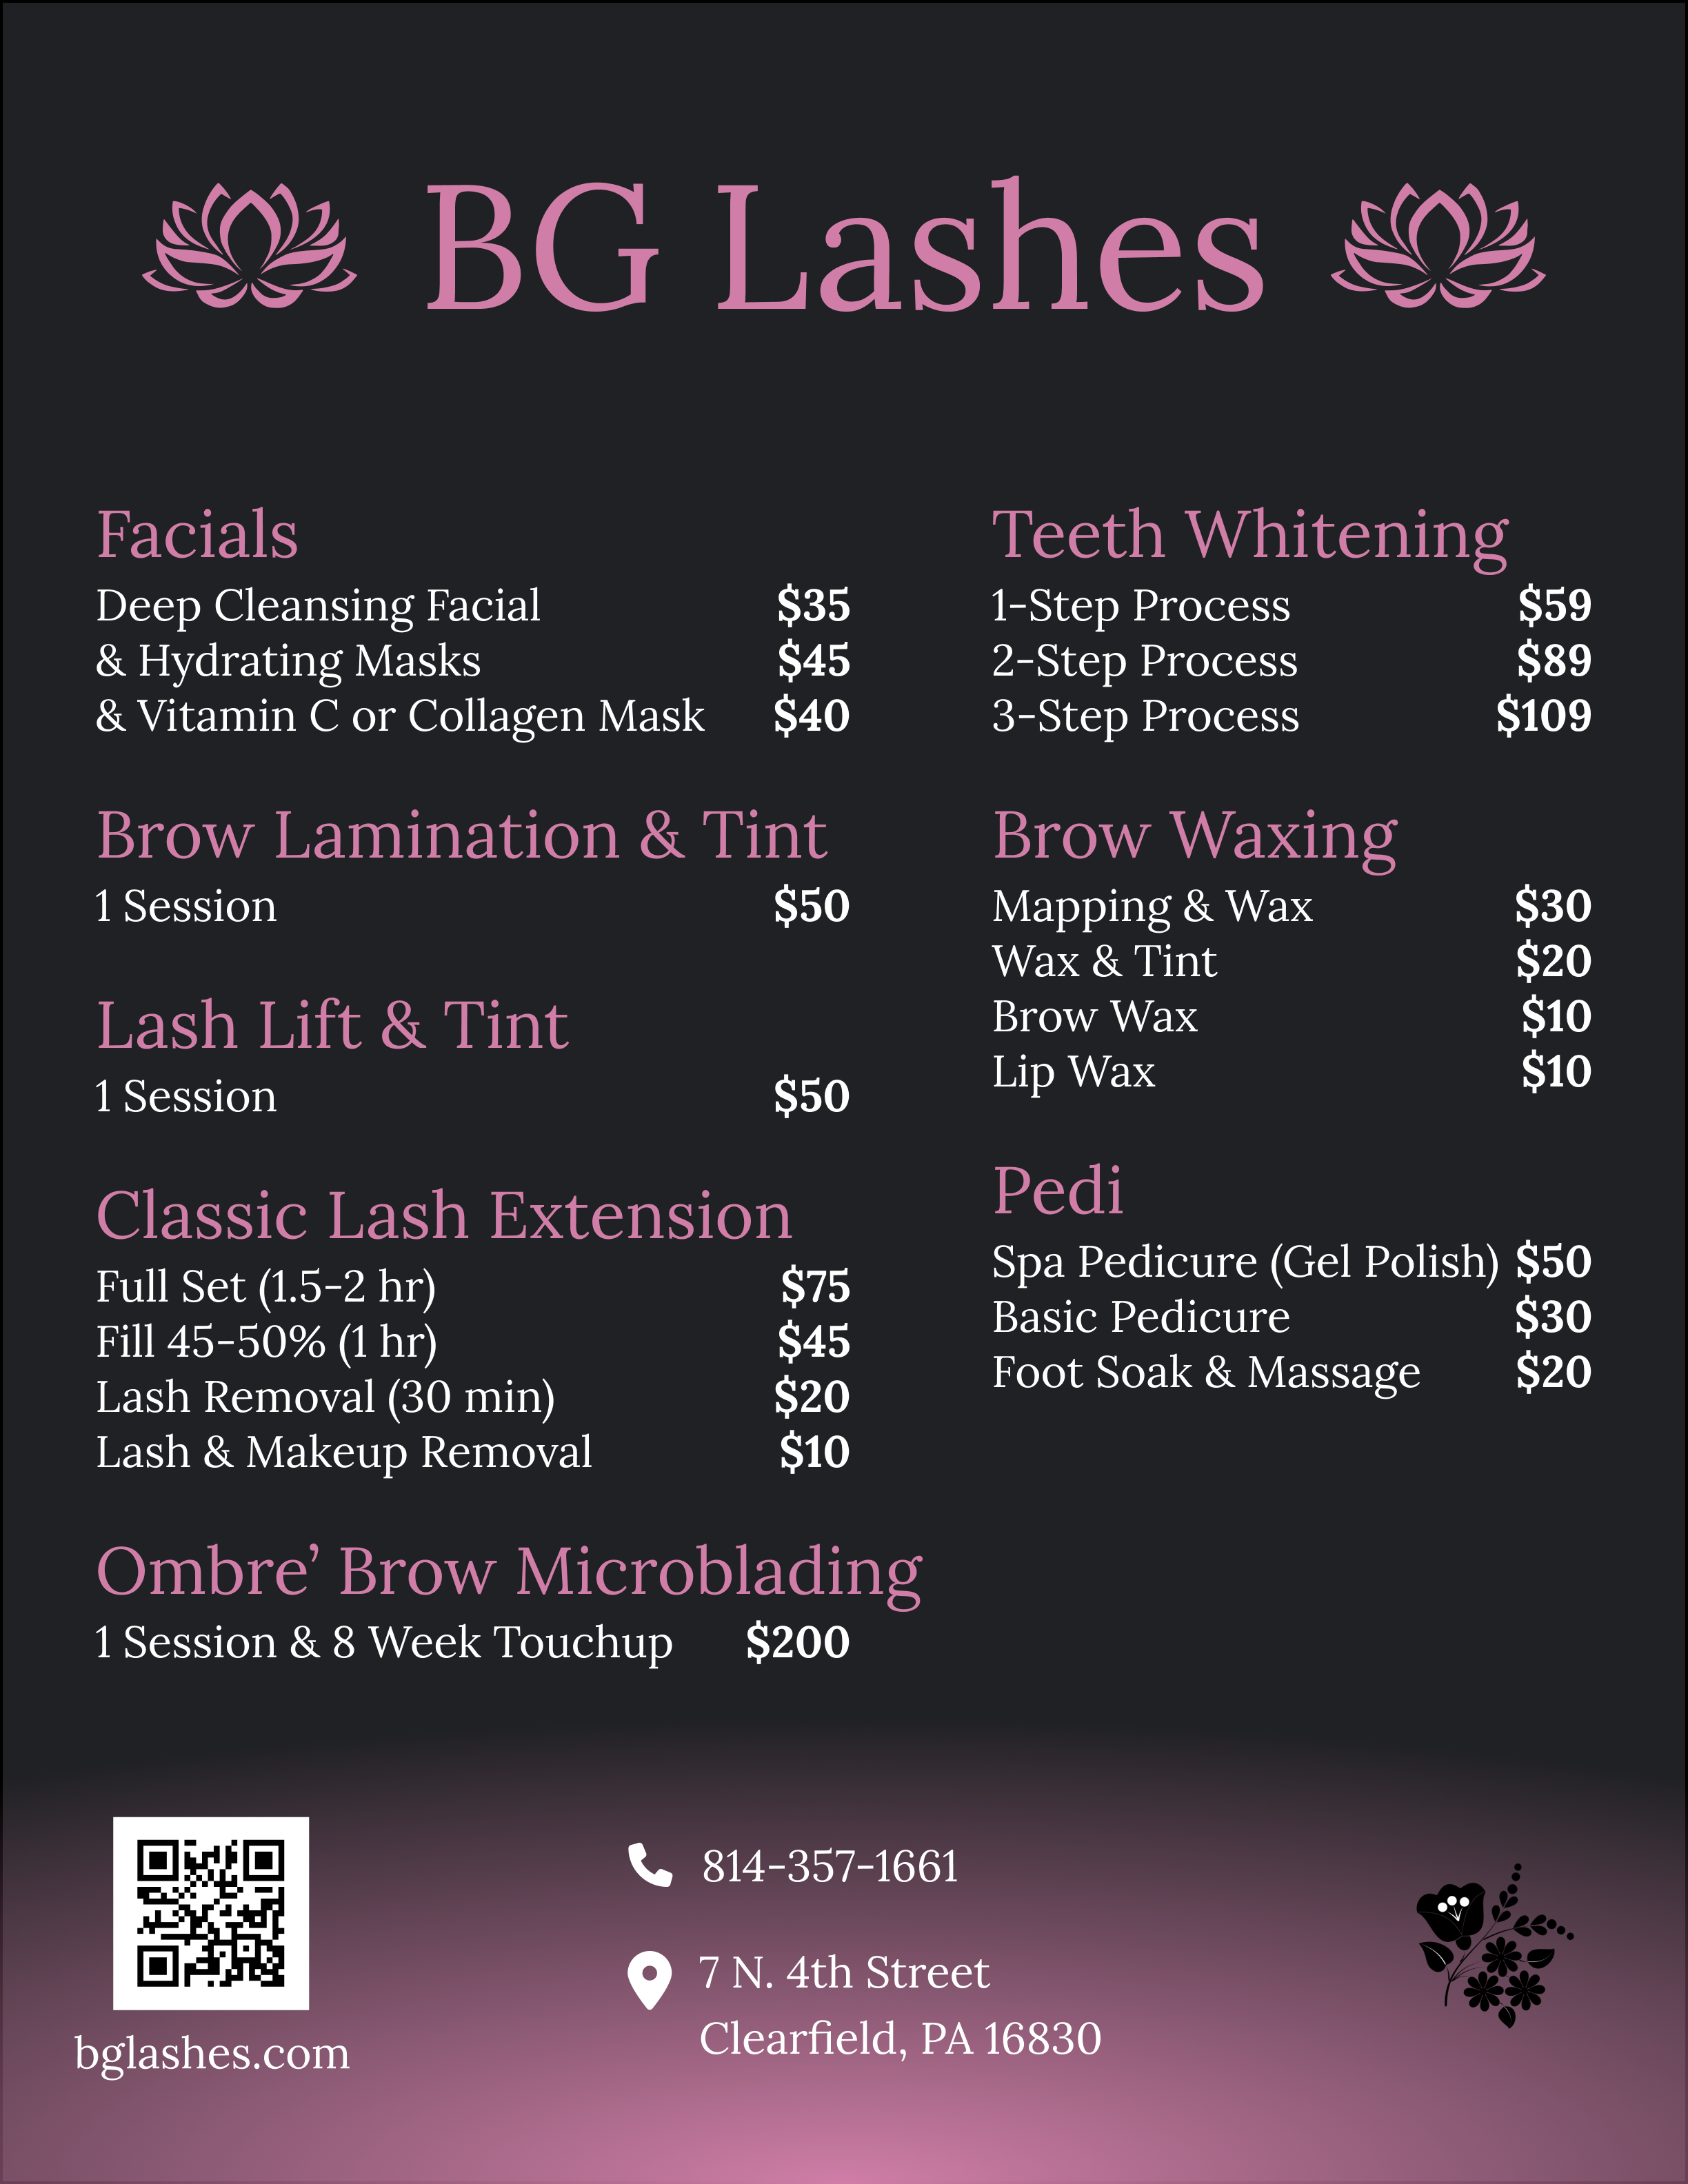 Sales sheet for BG Lashes including services, prices, hours and location with a QR code to their website.